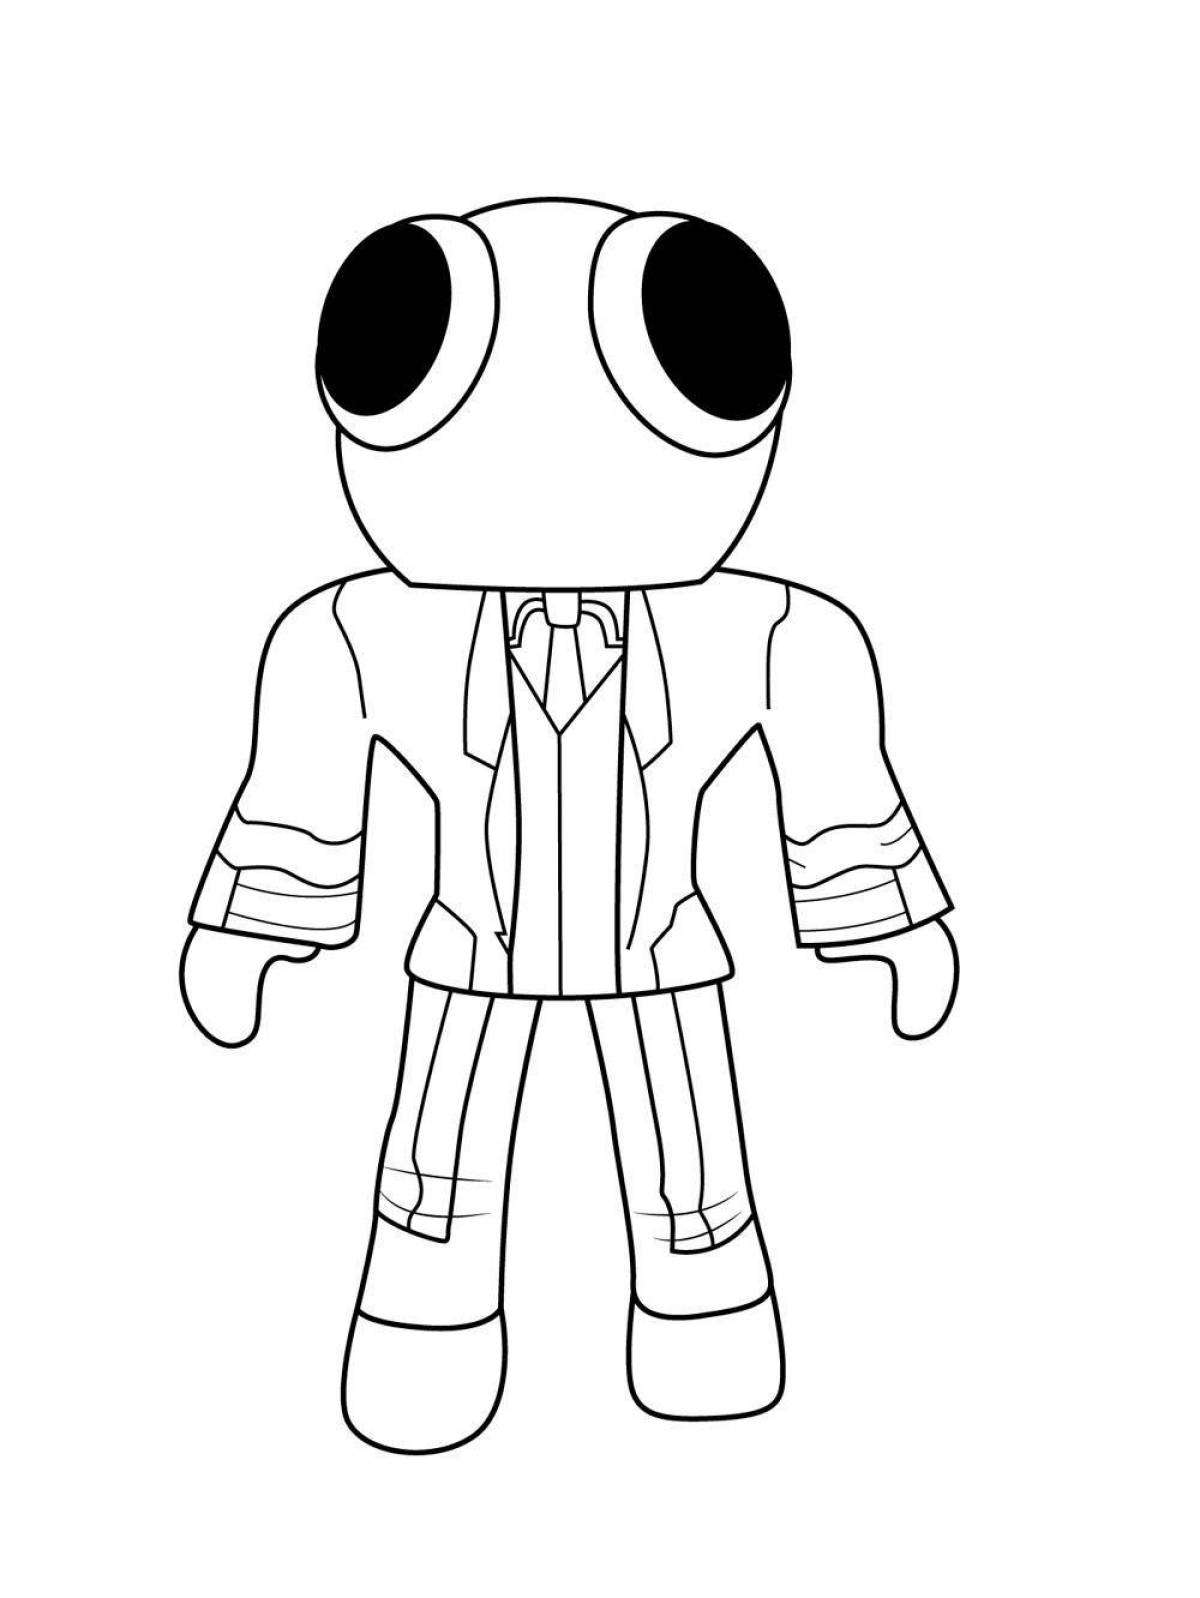 Roblox brookhaven colorful coloring page